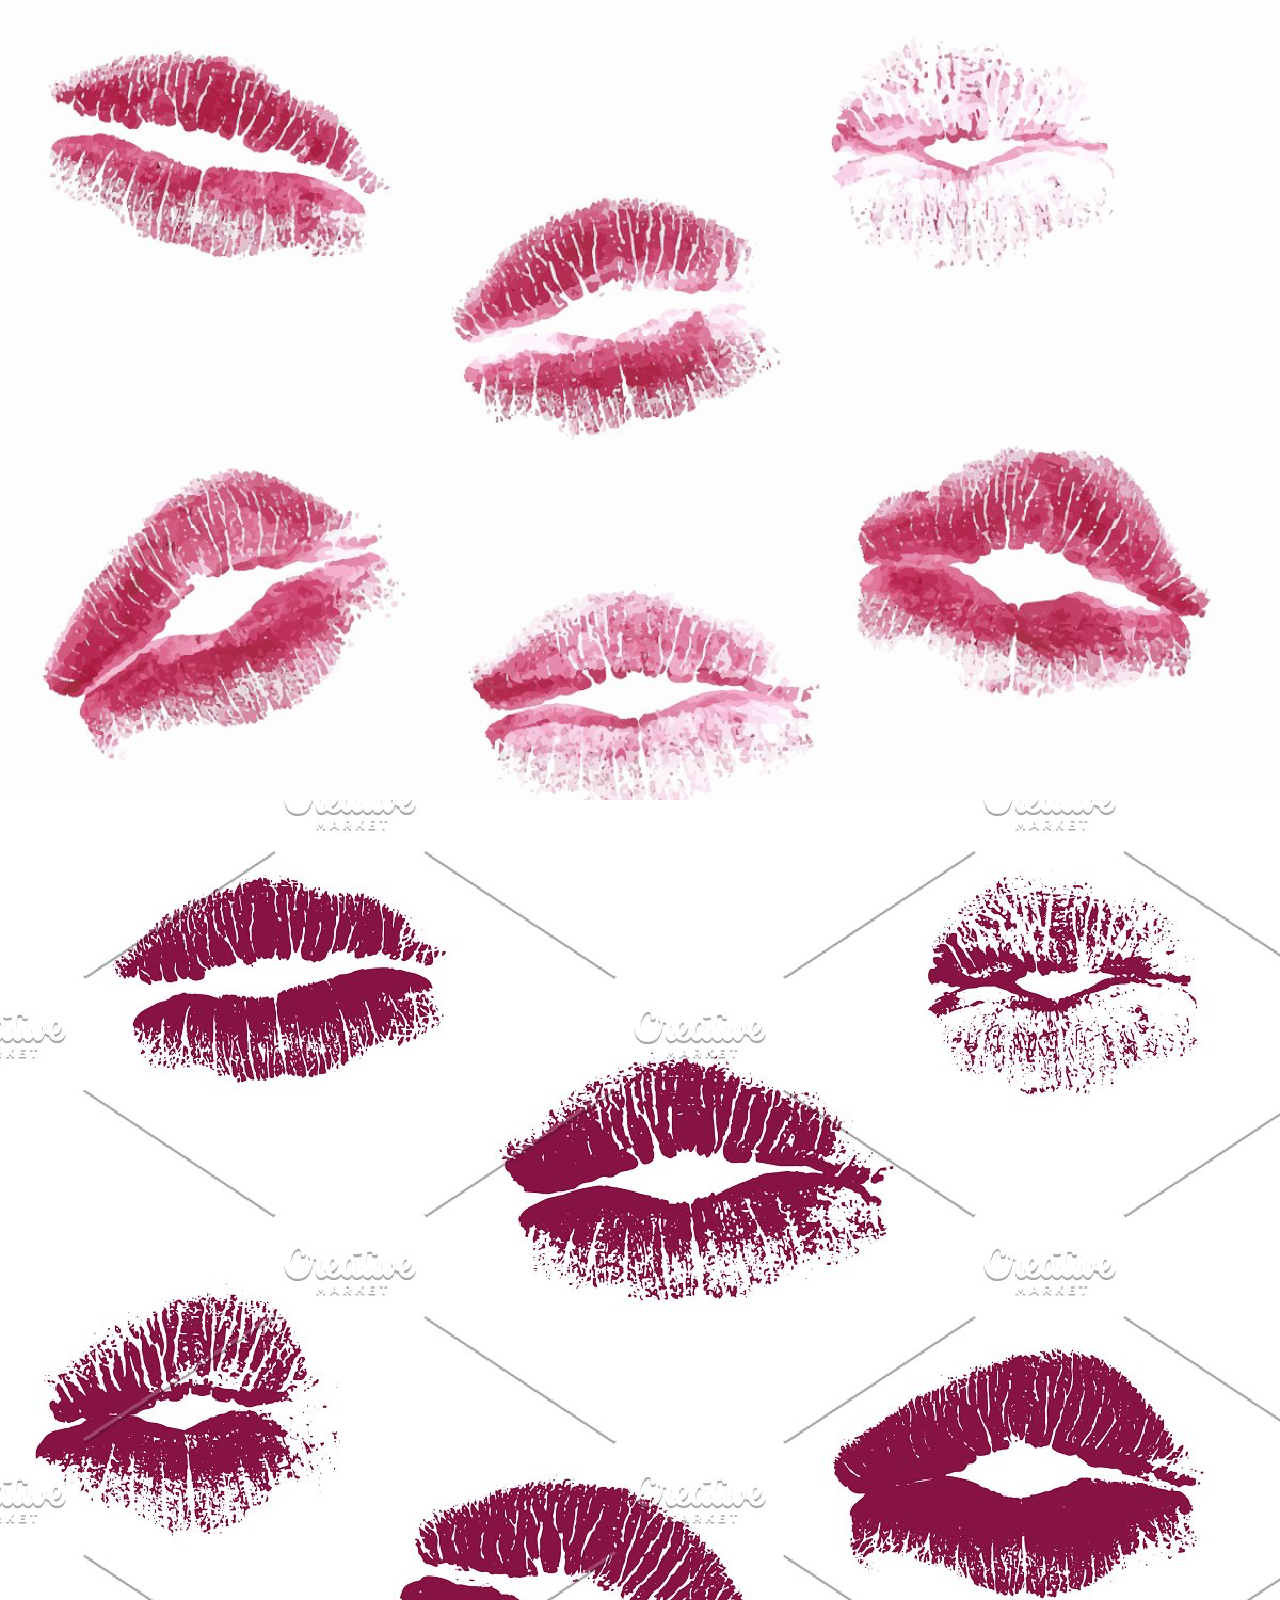 Real kiss lipstick of female pinterest image preview.